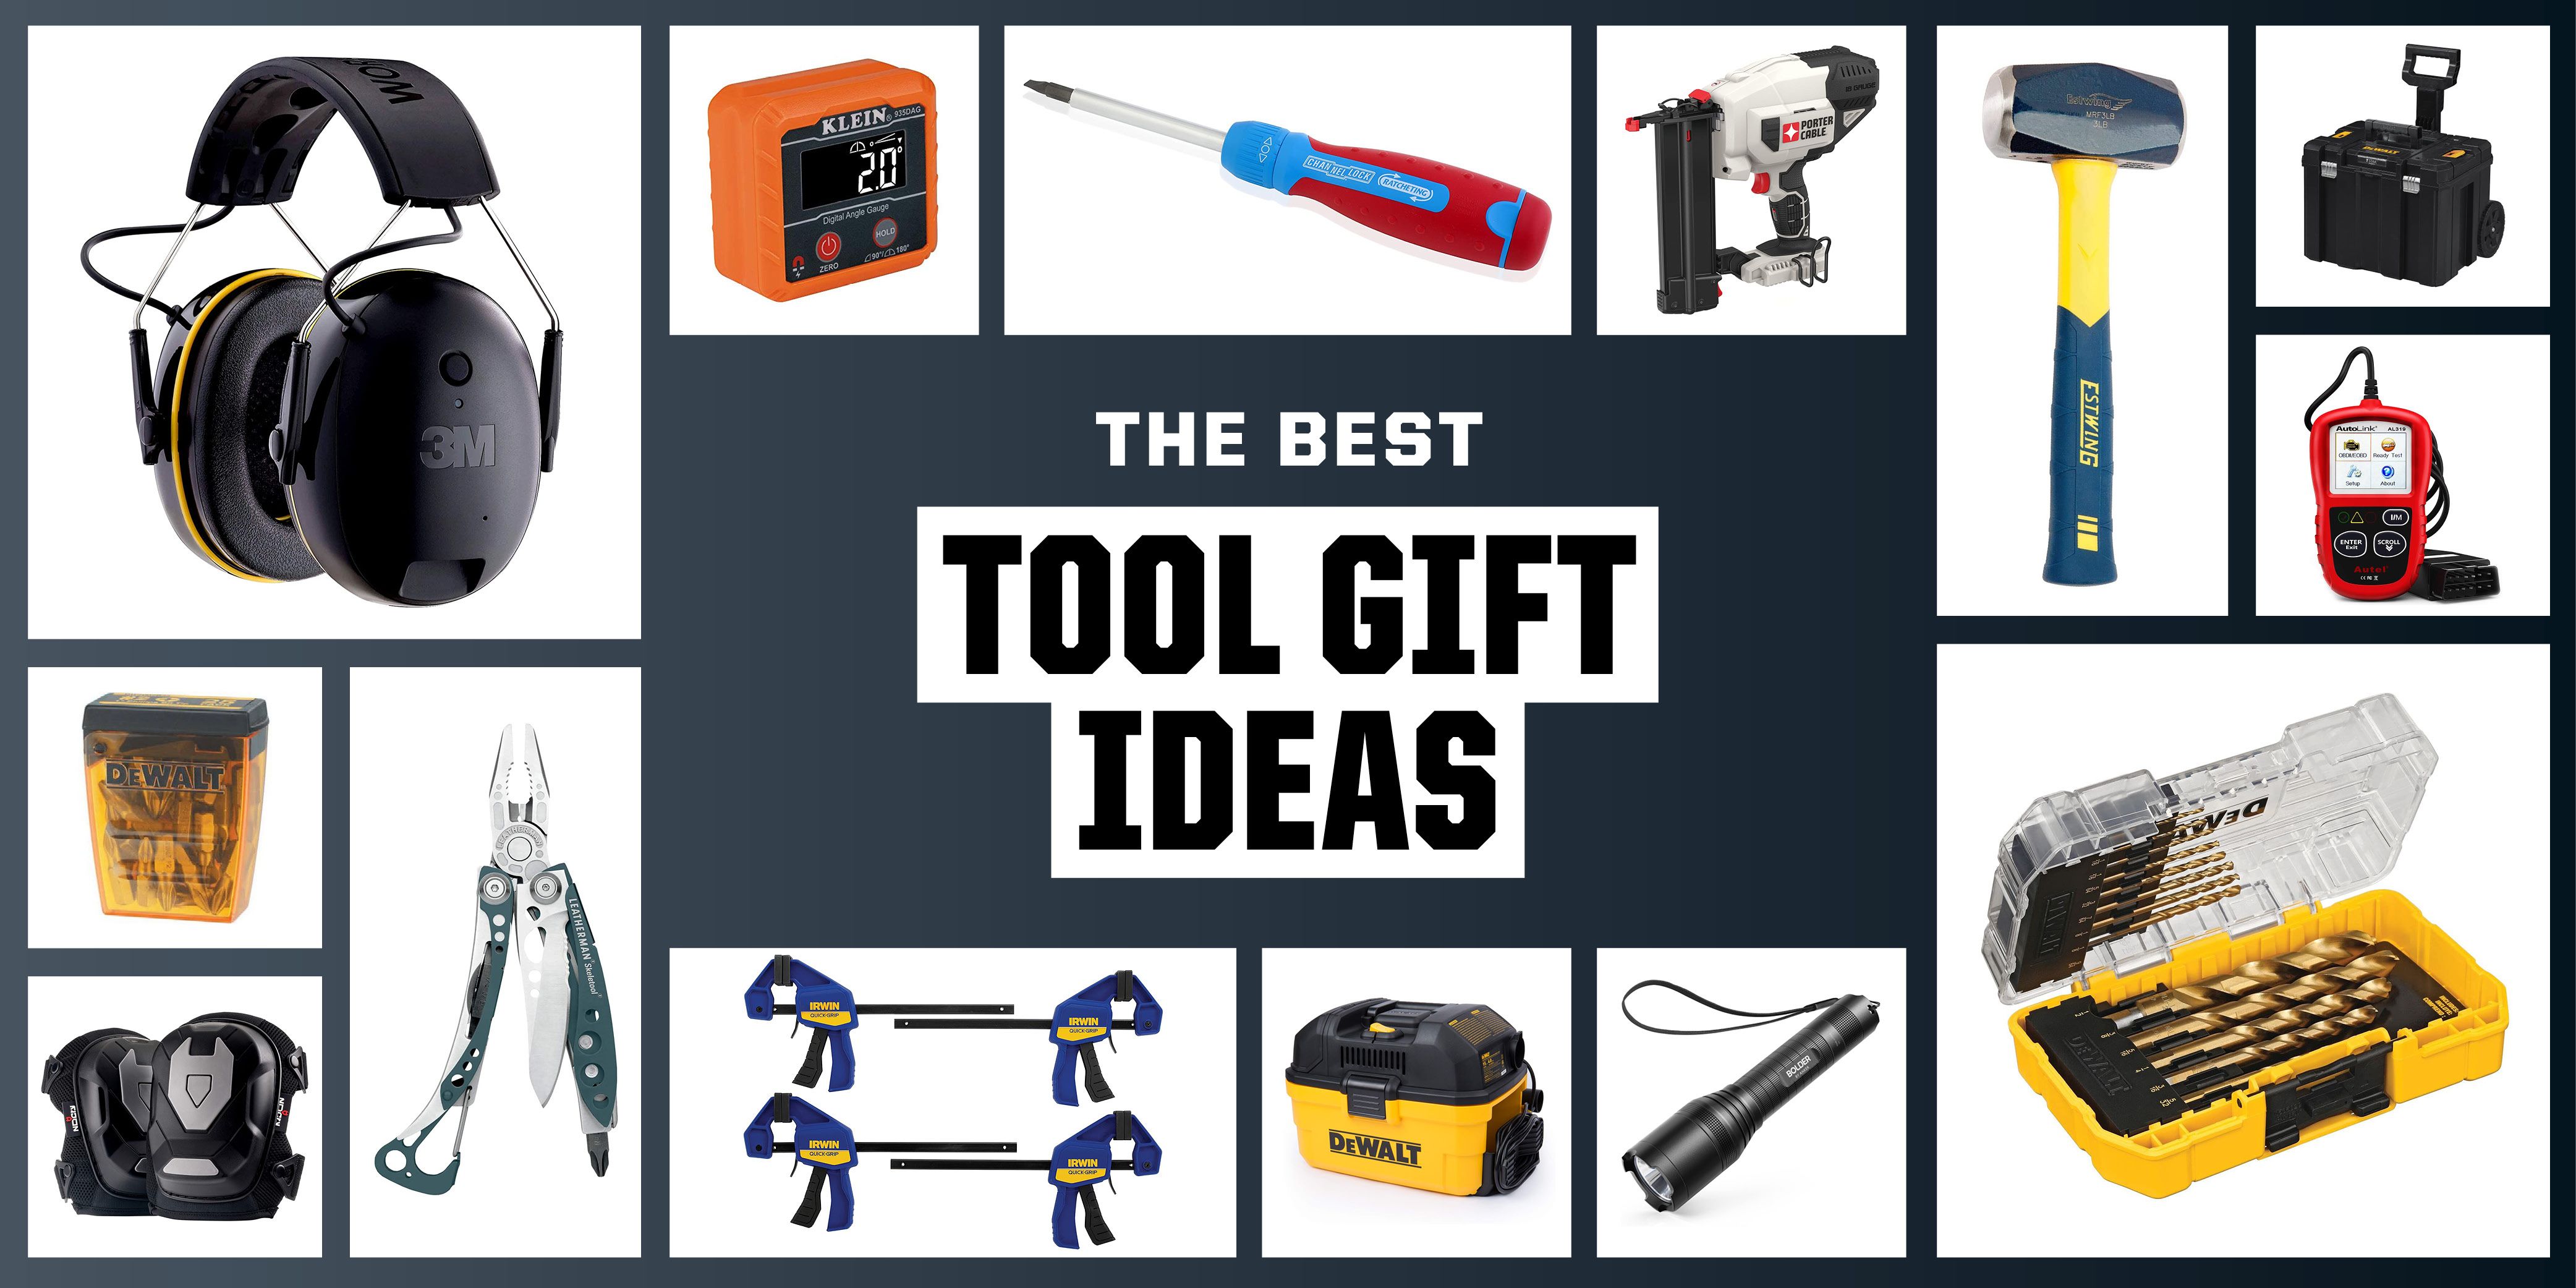 Tools & Accessories, Gifts for Personalization